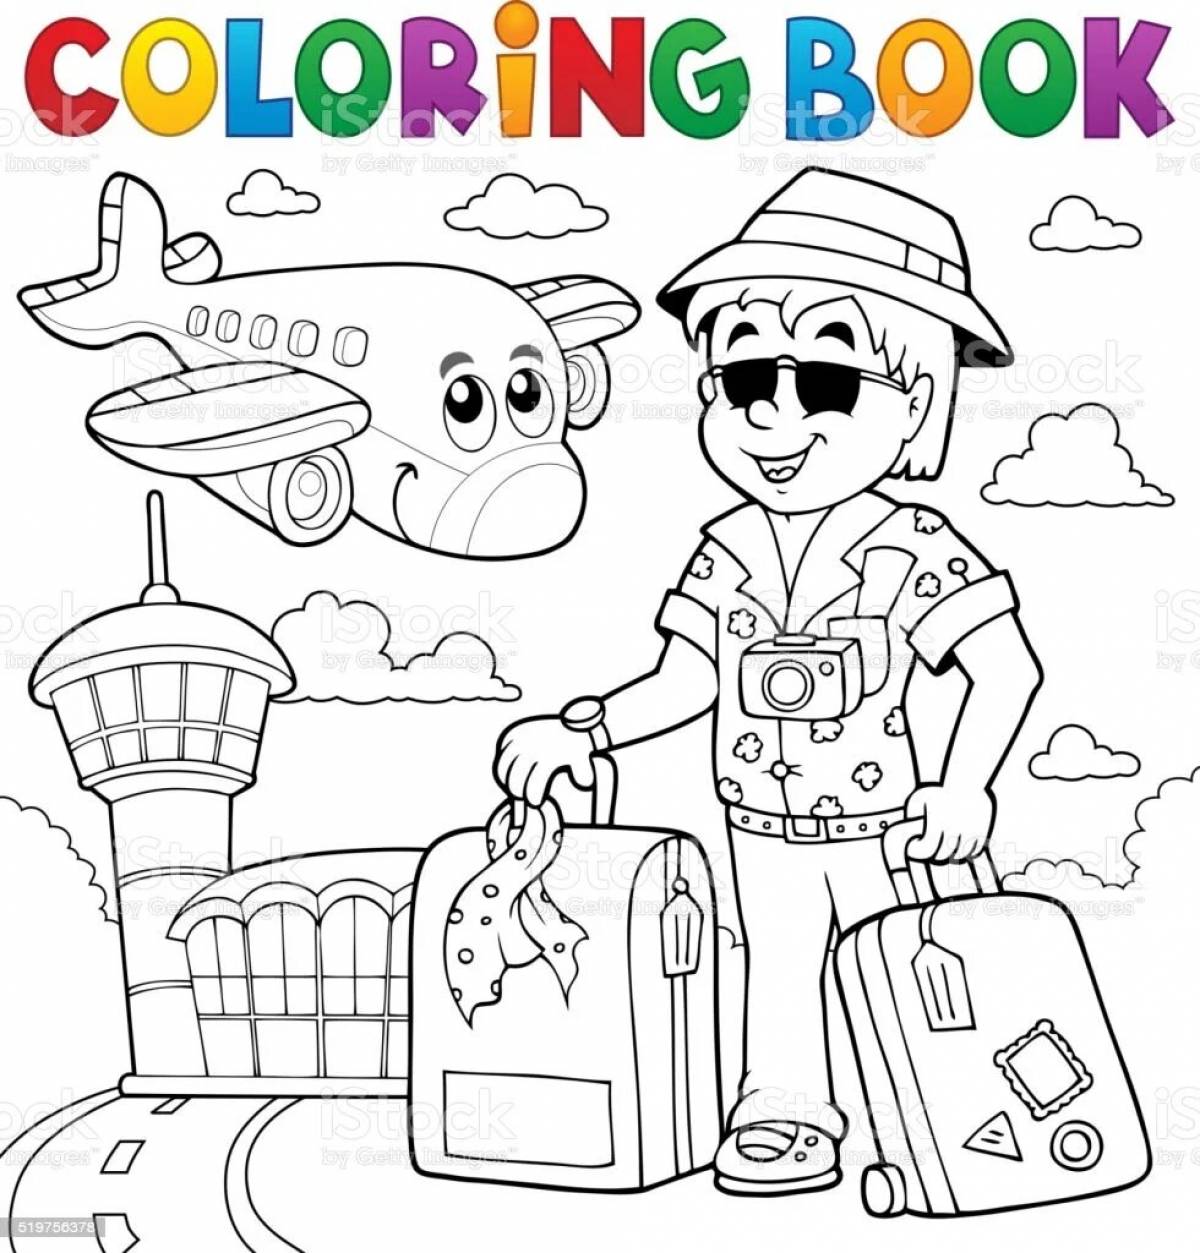 Exquisite travel coloring book for kids